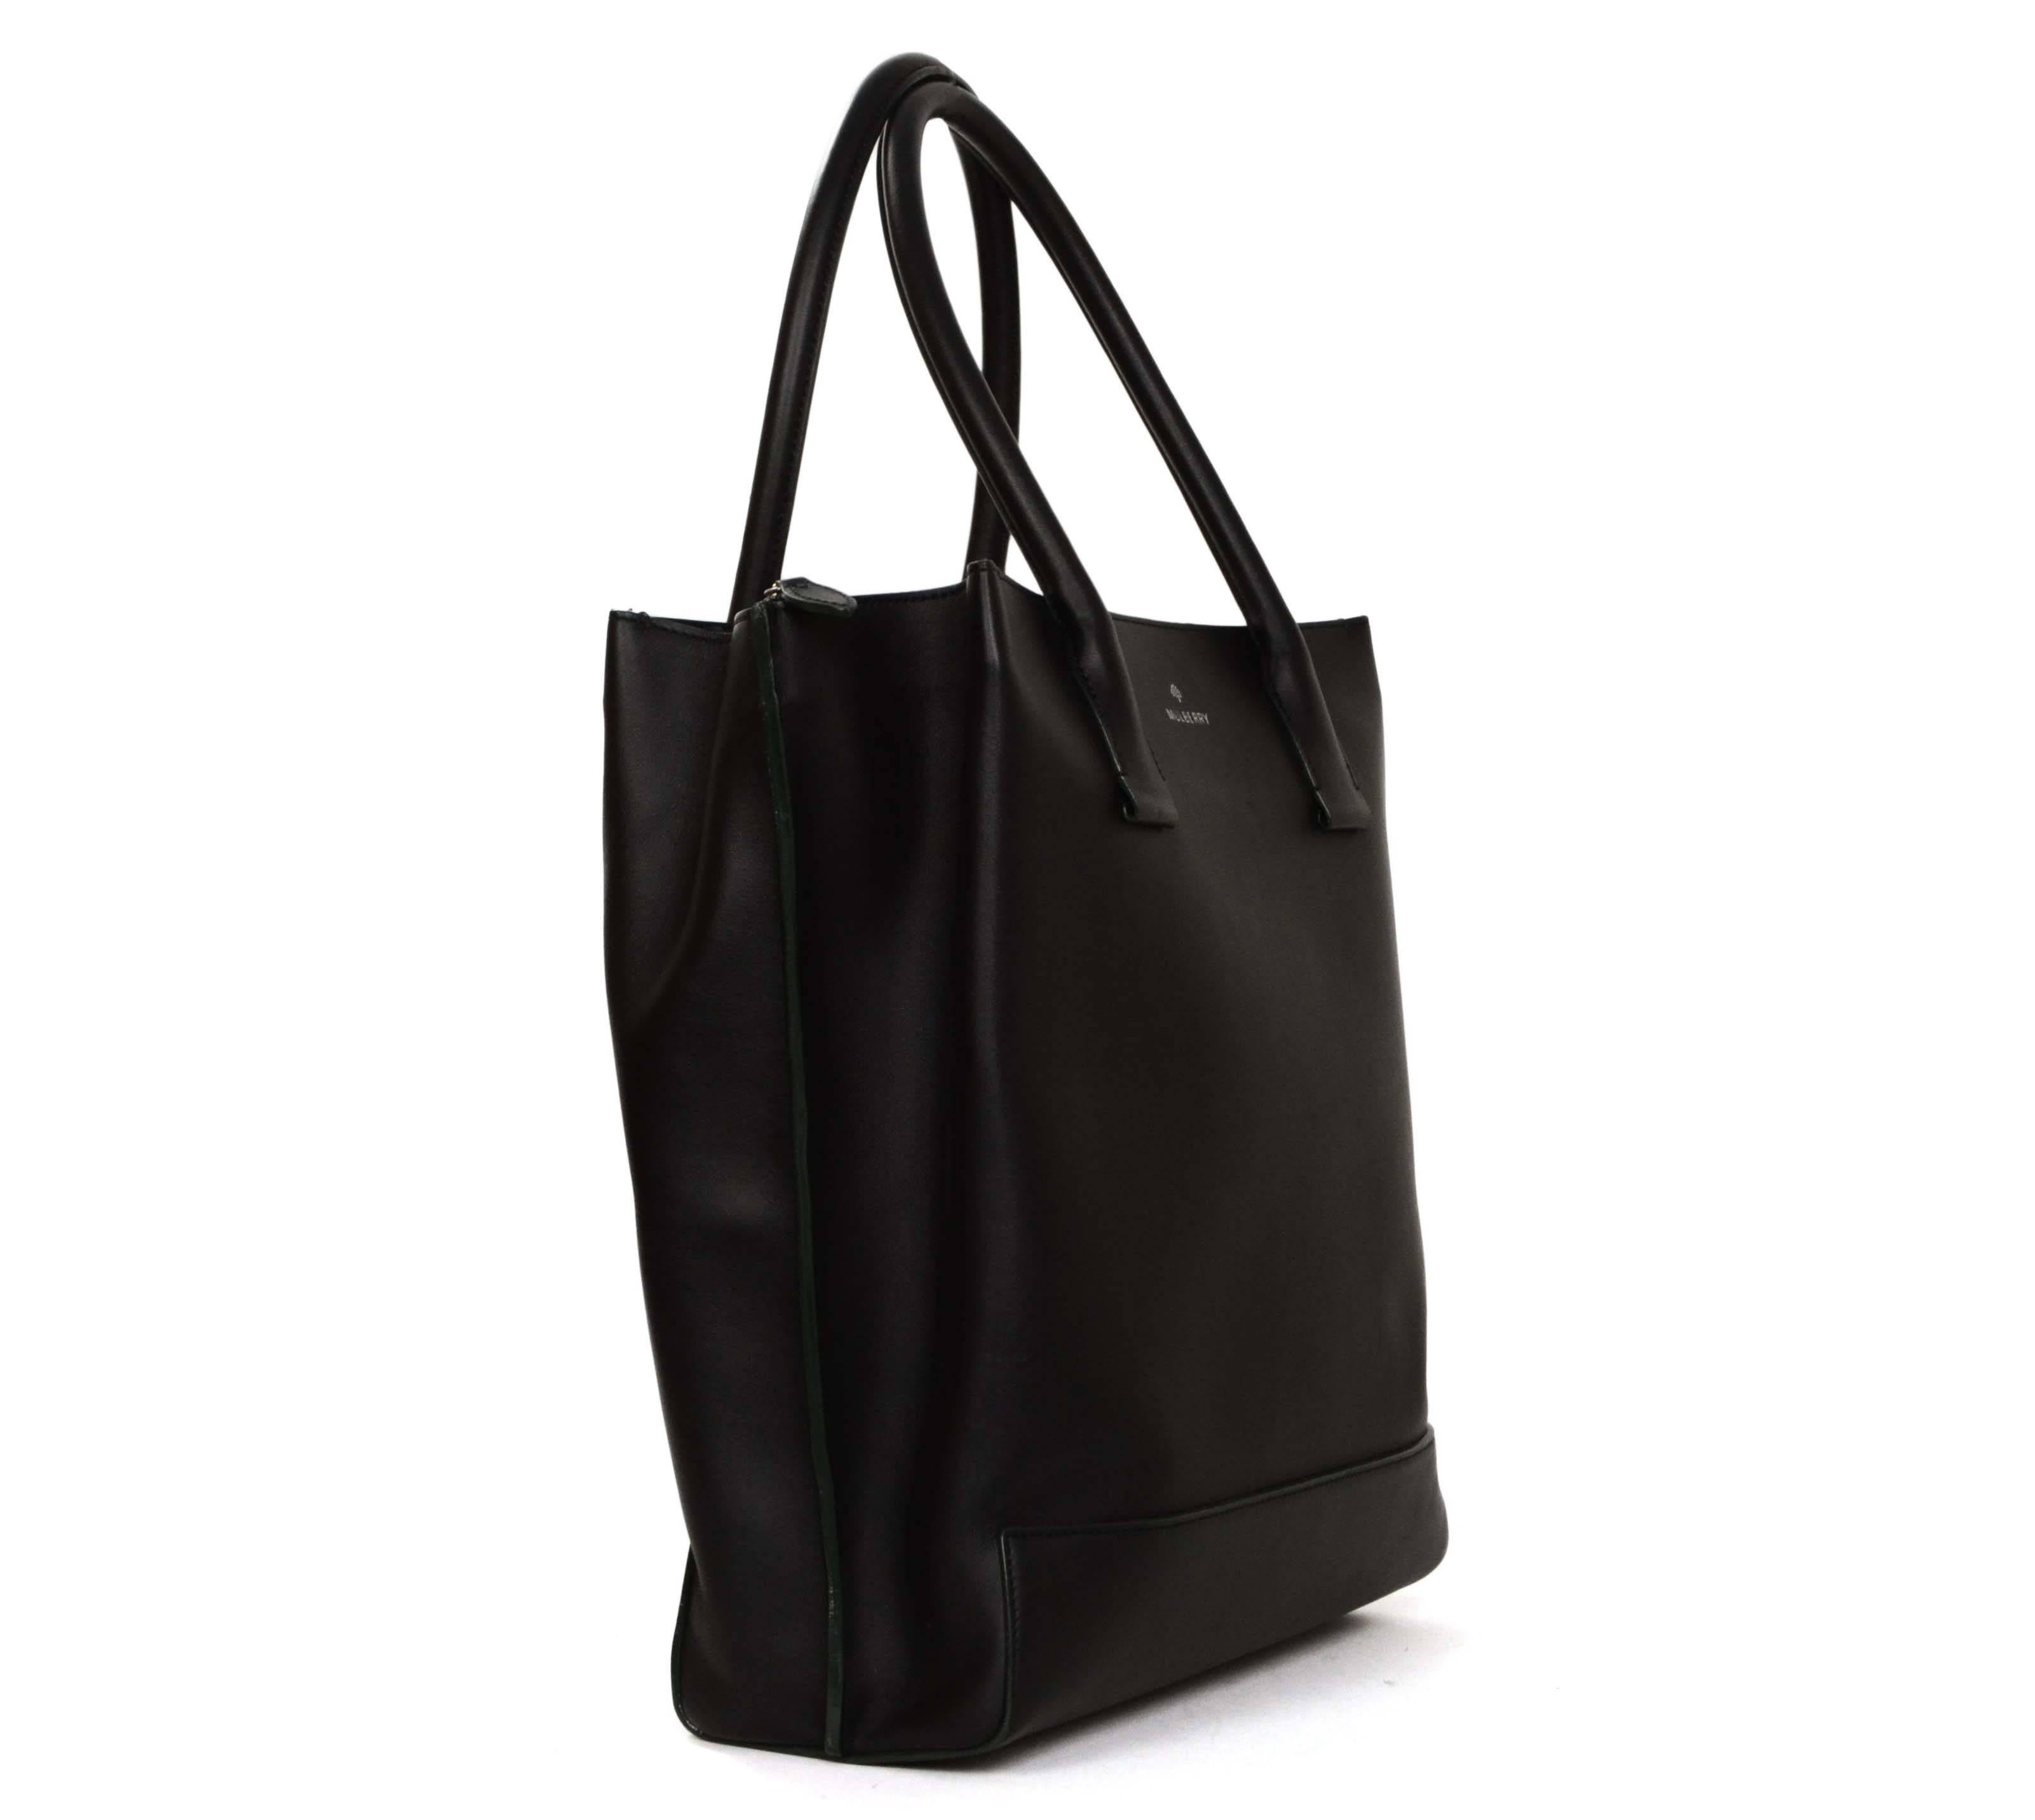 Mulberry Black Leather Arundel Tote Bag

    Made In: Turkey

    Color: Black

    Materials: Leather

    Lining: Suede

    Closure/Opening: Open top with one zippered compartment

    Exterior Pockets: None

    Serial Number/Date